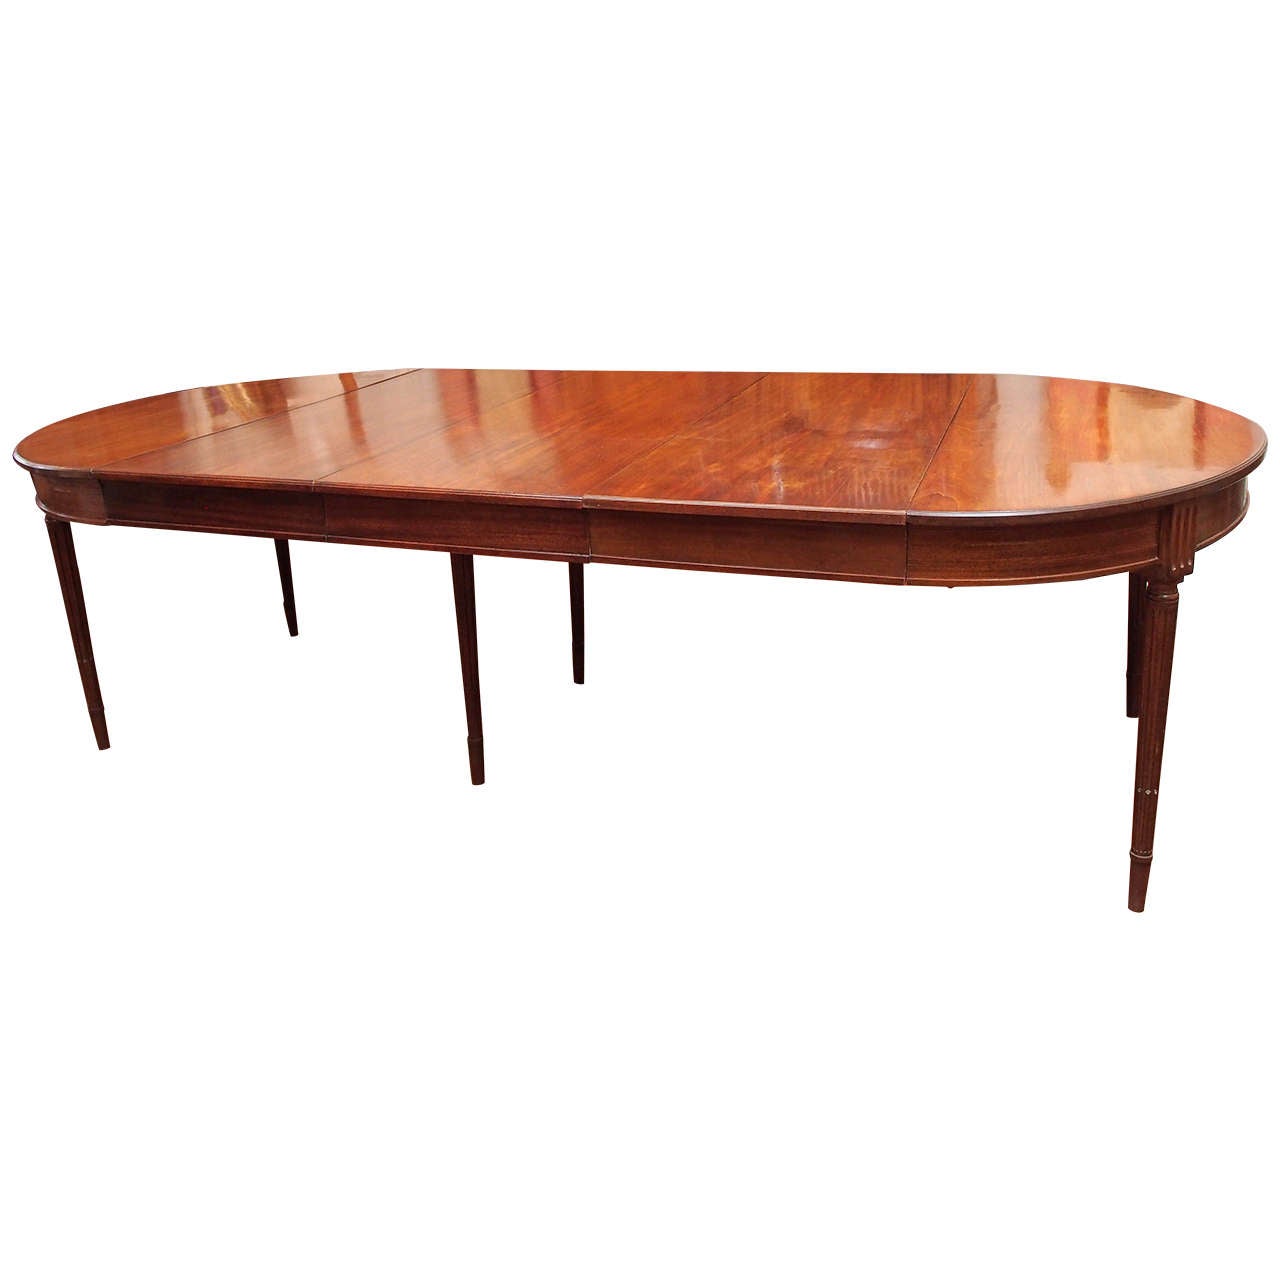 Louis XVI Style Dining Table with Three Leaves